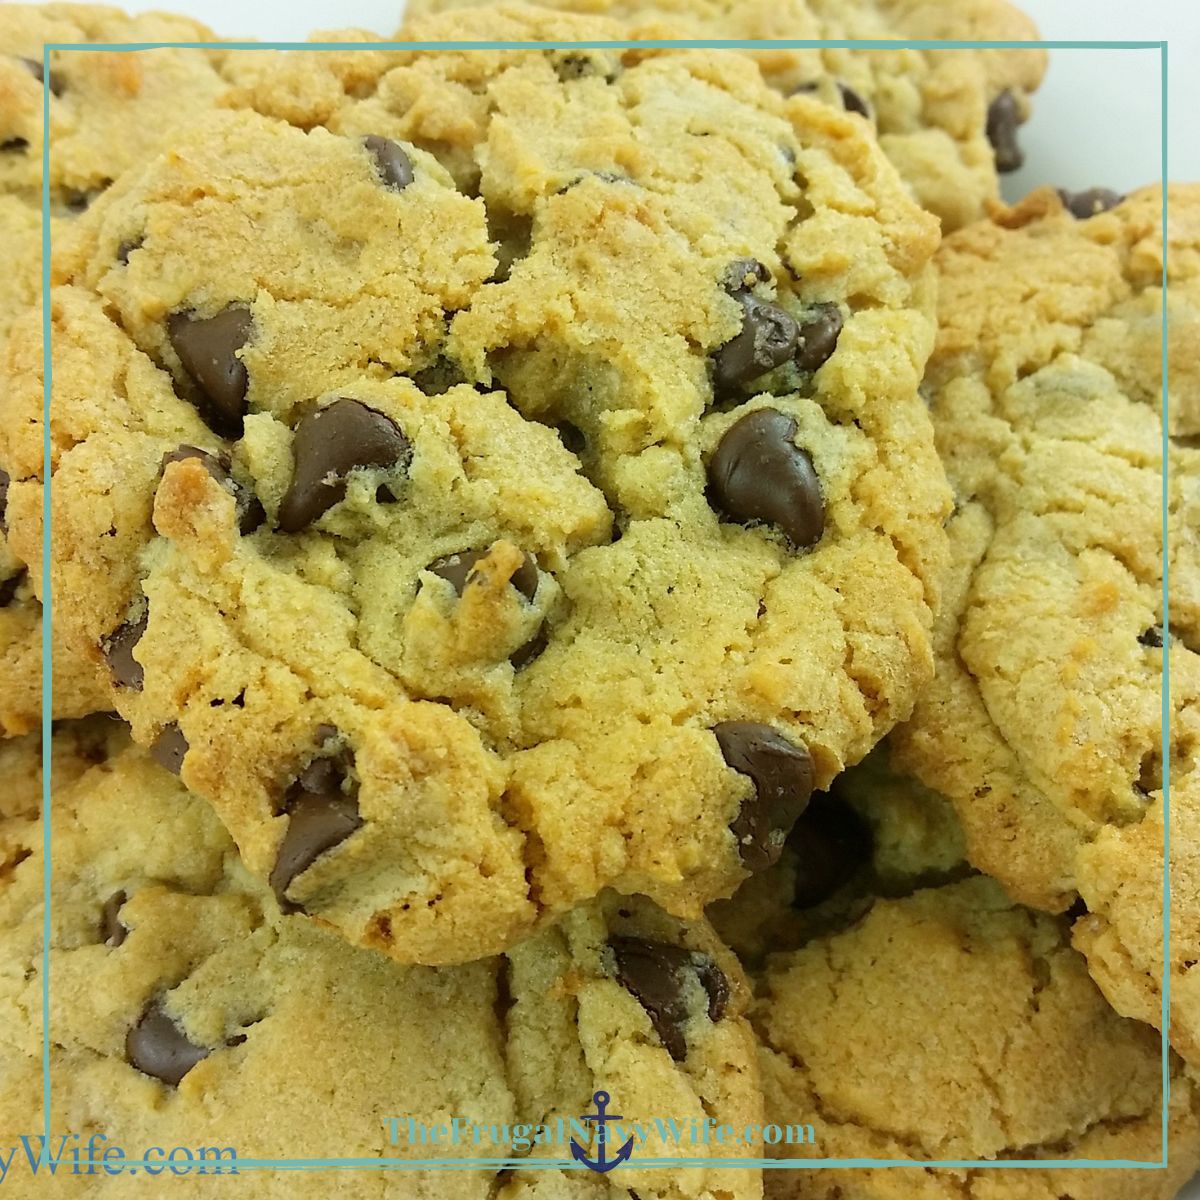 https://www.thefrugalnavywife.com/wp-content/uploads/2017/04/The-BEST-Copycat-Chick-Fil-A-Chocolate-Chip-Cookie-Recipe-Social.jpg